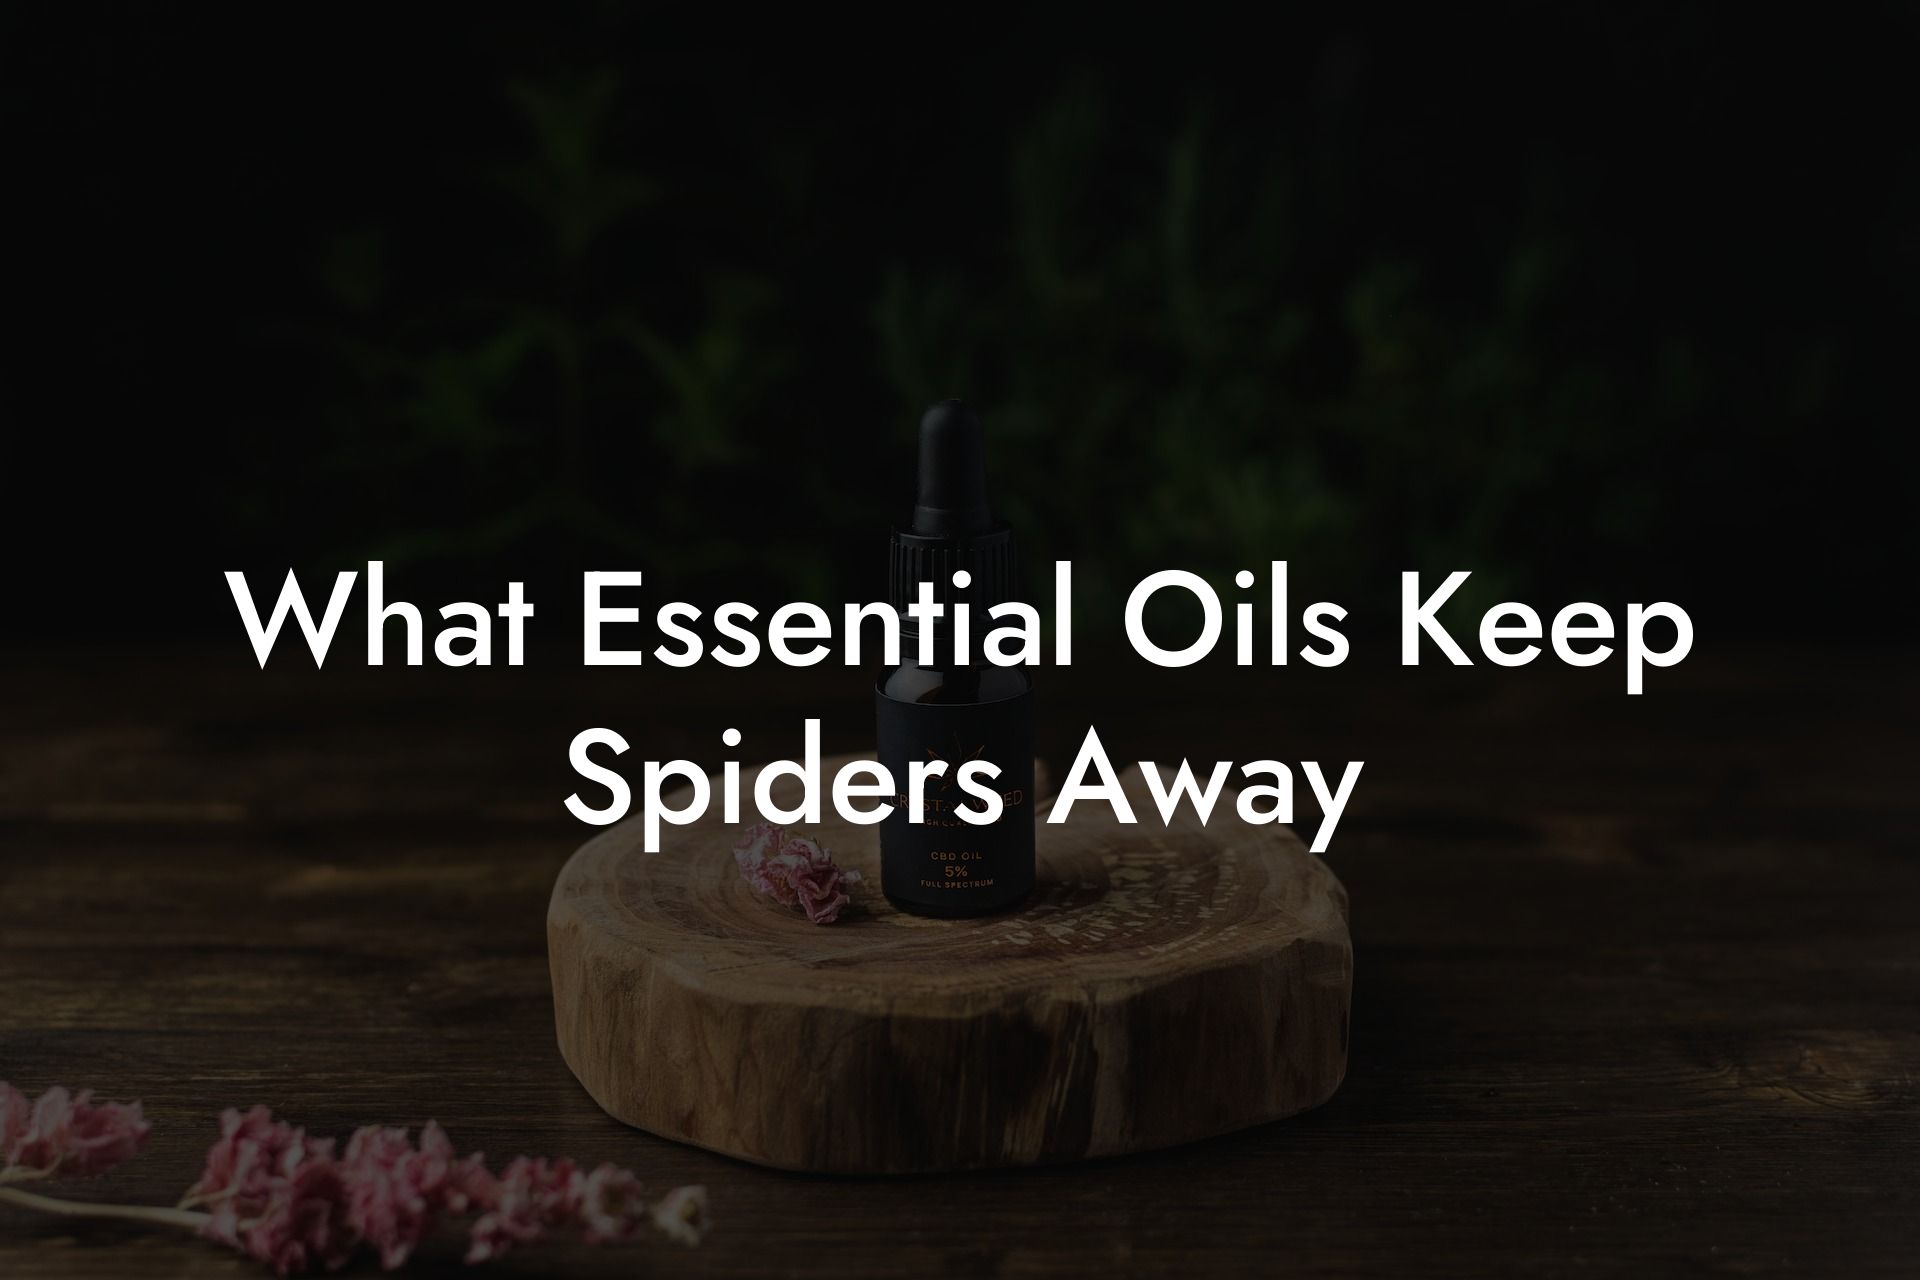 What Essential Oils Keep Spiders Away